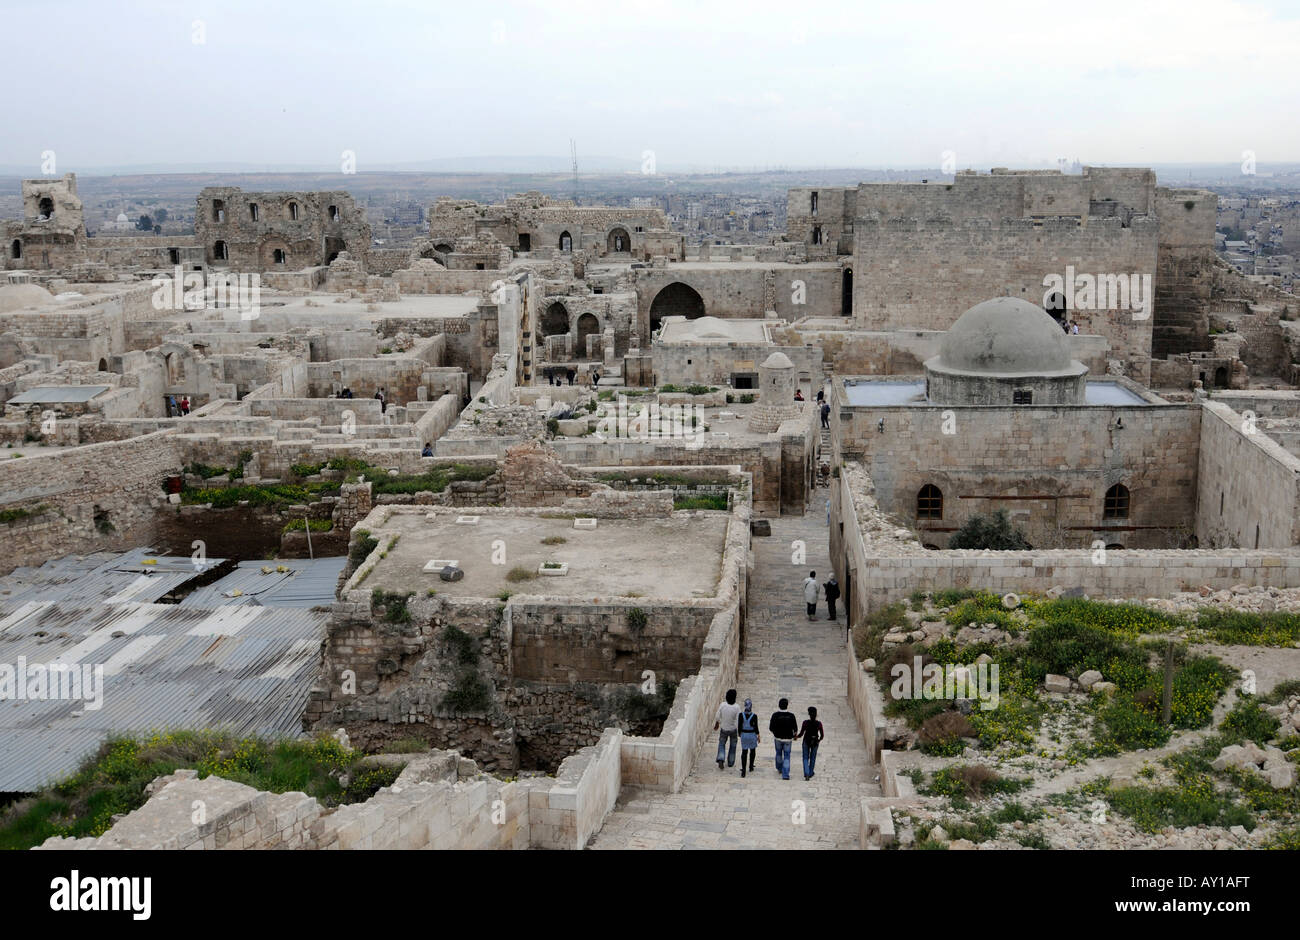 A view inside the citadel in the old town of Aleppo, Syria. Stock Photo